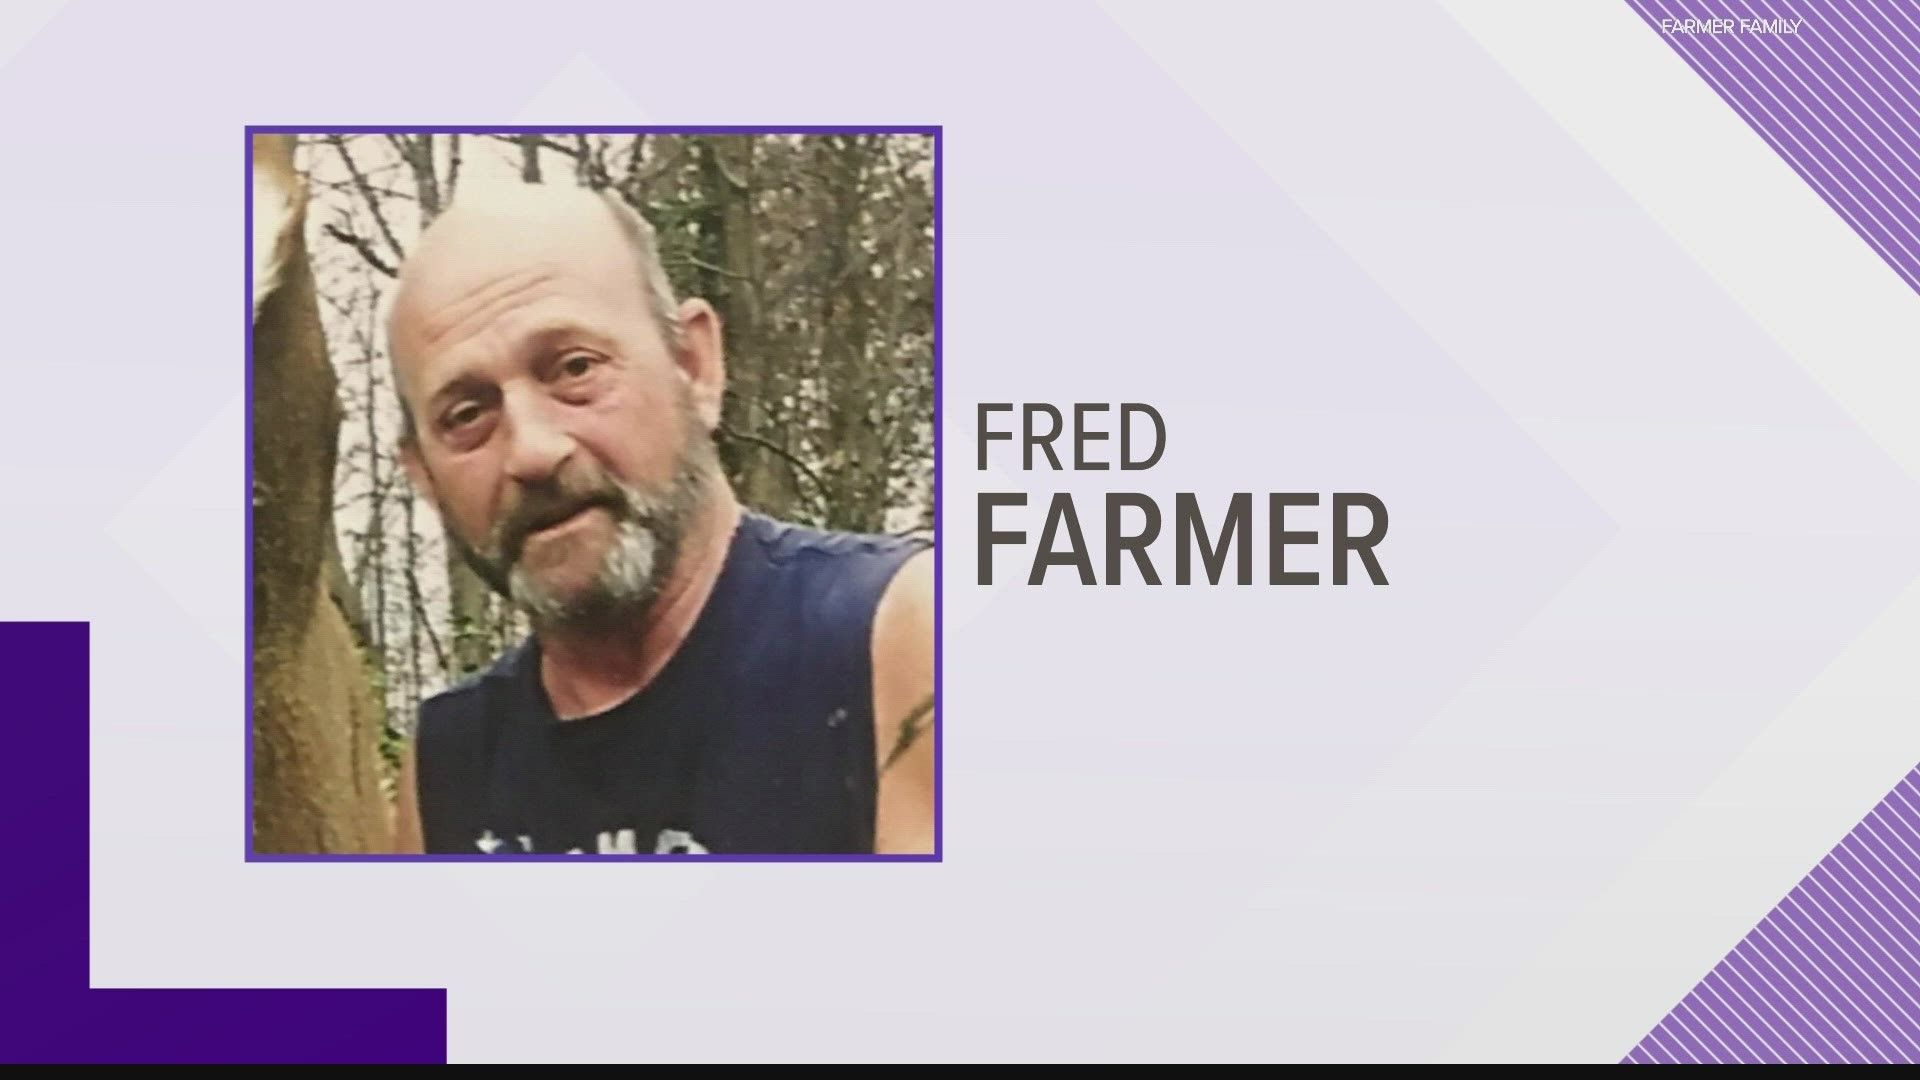 The body of Fred Farmer Jr. was found in a storage facility in Brownsburg. His son had already been charged in his murder.